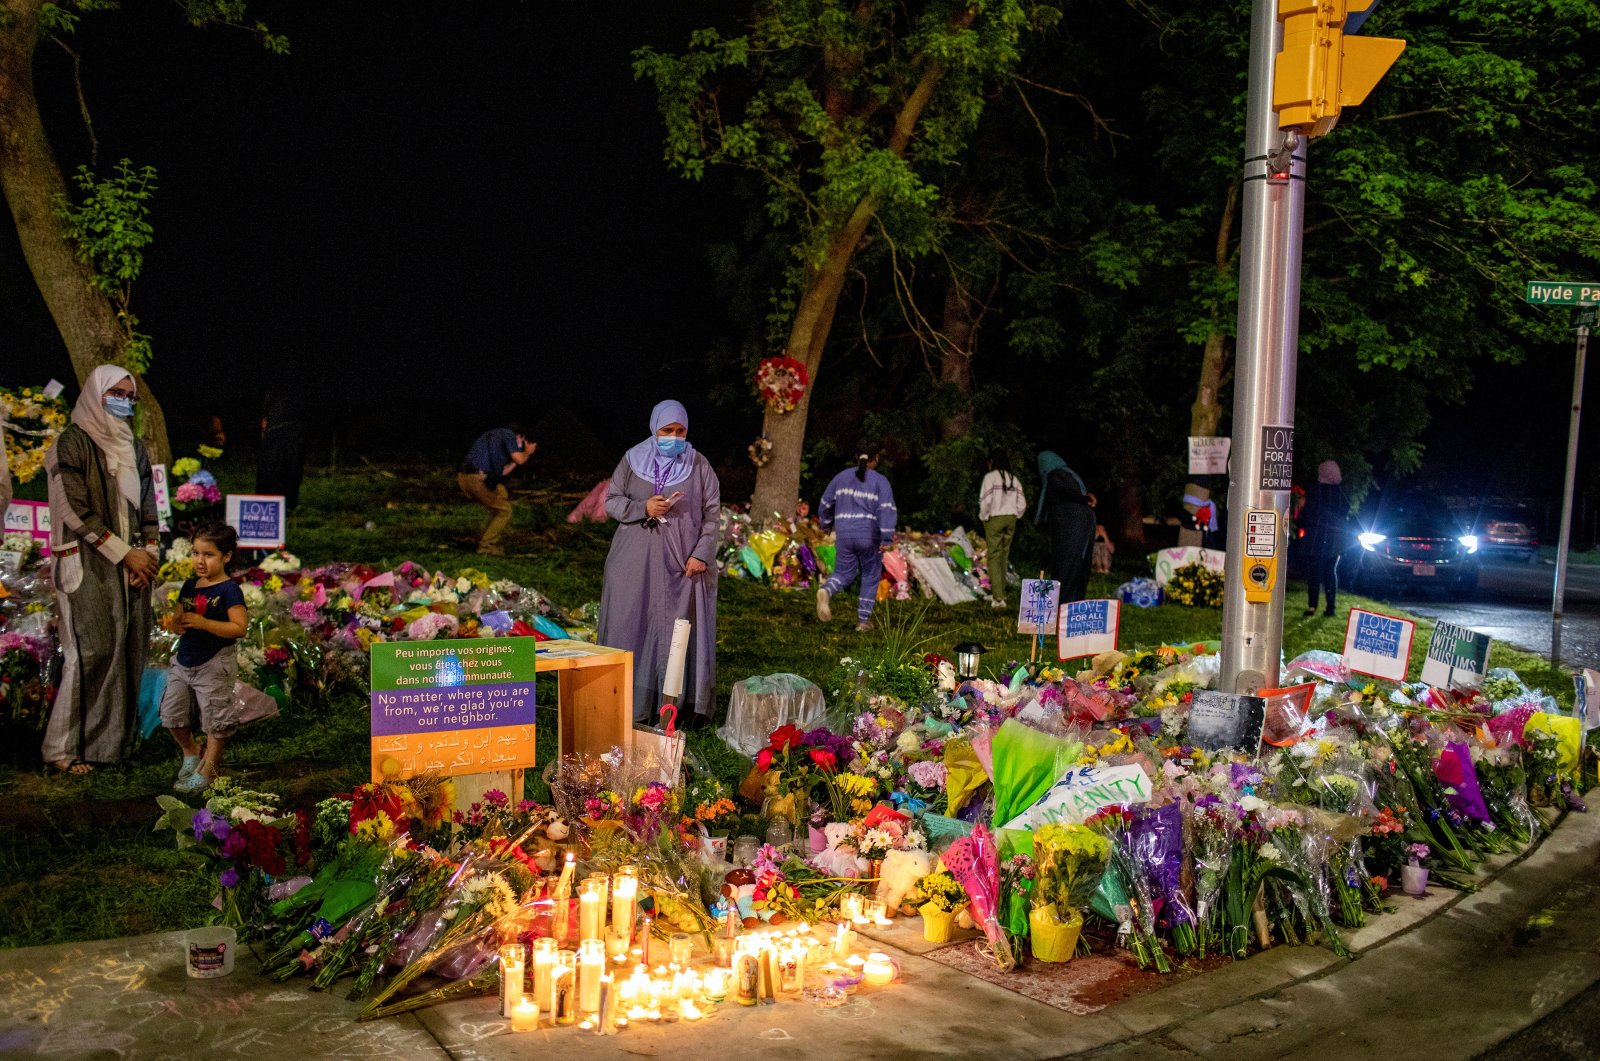 People gather at a makeshift memorial at the fatal crime scene where a man driving a pickup truck jumped the curb and ran over a Muslim family in what police say was a deliberately targeted Islamophobic hate crime, in London, Ontario, Canada, June 8, 2021. (Reuters Photo)